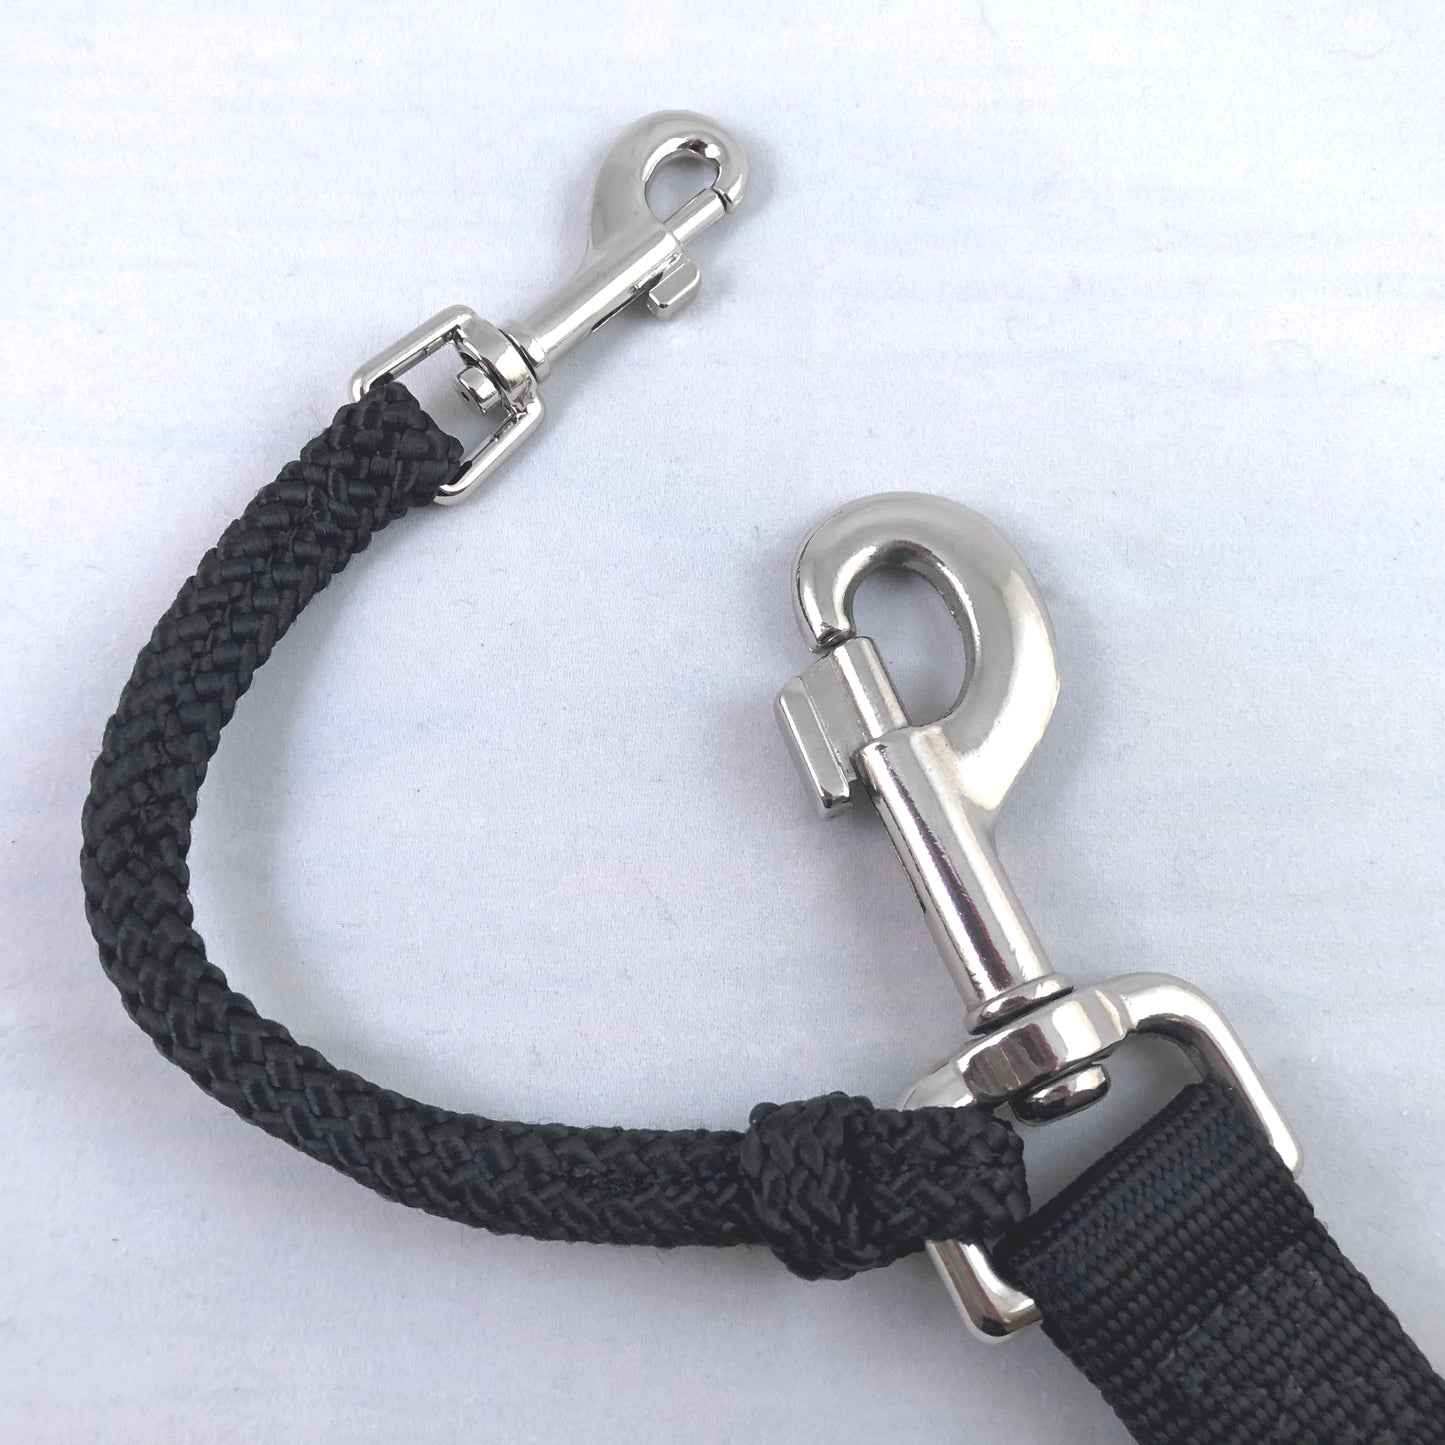 Leash Safety Strap-Light Duty Woven Cord